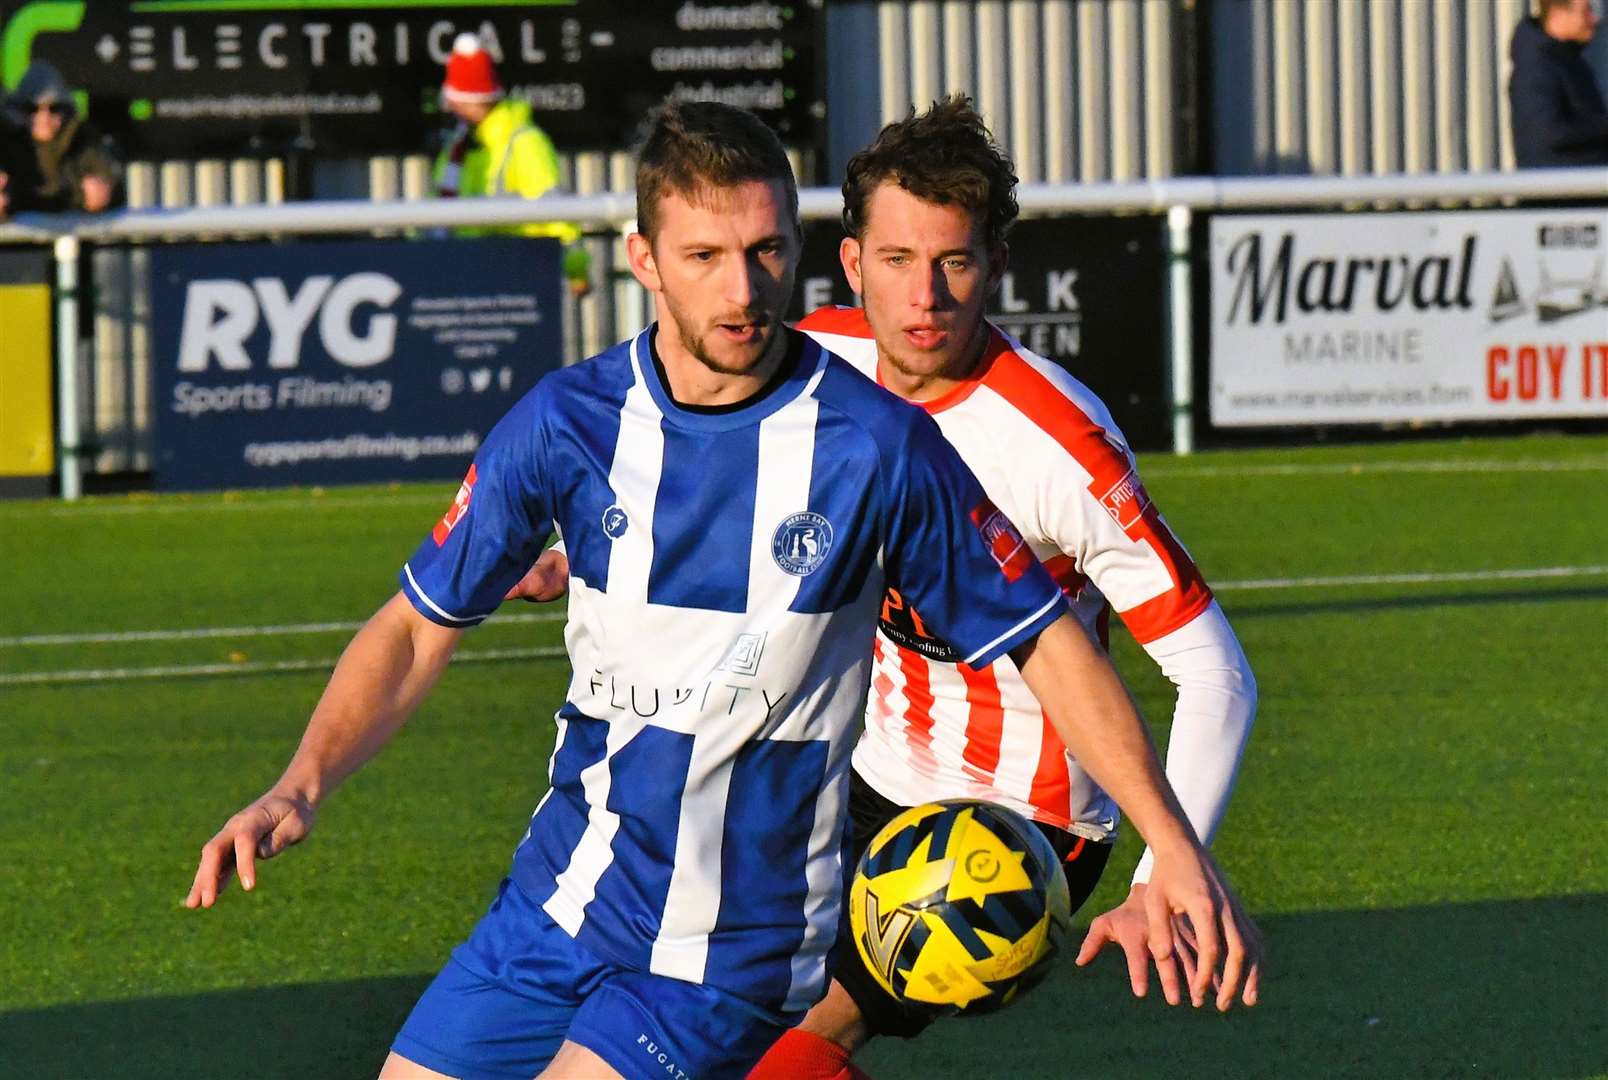 One of Herne Bay’s scorers, Kane Rowland, takes possession for his team. Picture: Marc Richards